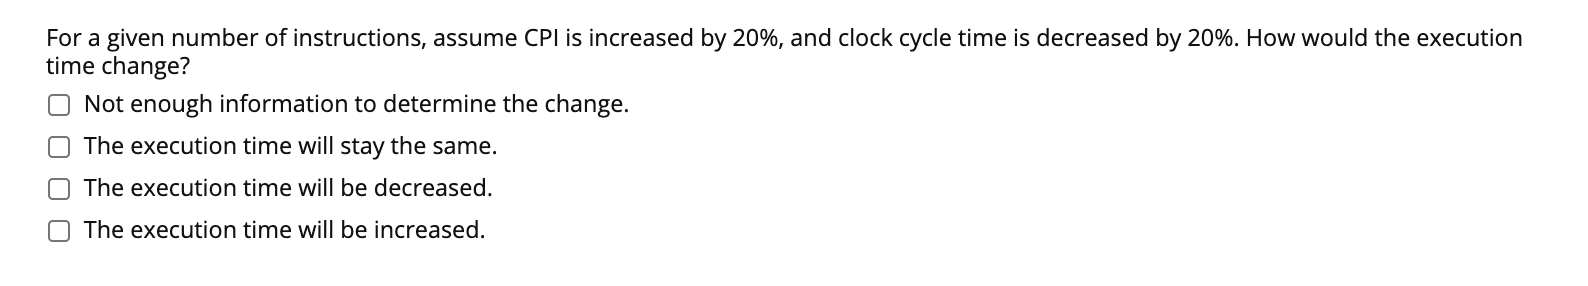 For a given number of instructions, assume CPI is increased by 20%, and clock cycle time is decreased by 20%. How would the execution
time change?
Not enough information to determine the change.
The execution time will stay the same.
The execution time will be decreased.
O The execution time will be increased.
